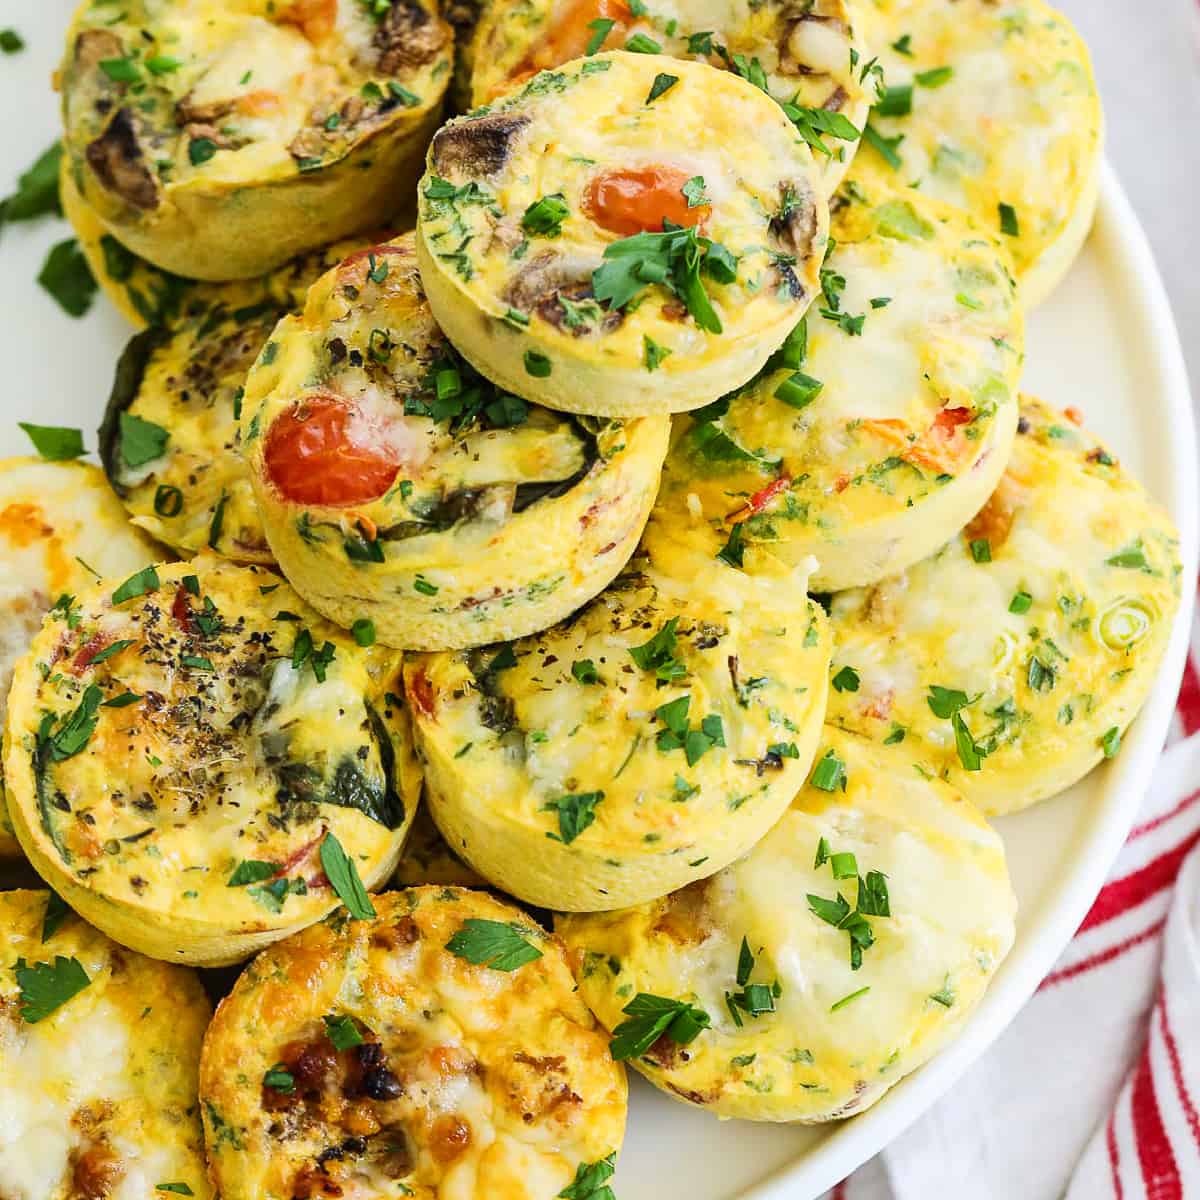 https://www.delicioustable.com/wp-content/uploads/2022/08/Egg-Muffins-Recipe-featured-.jpg